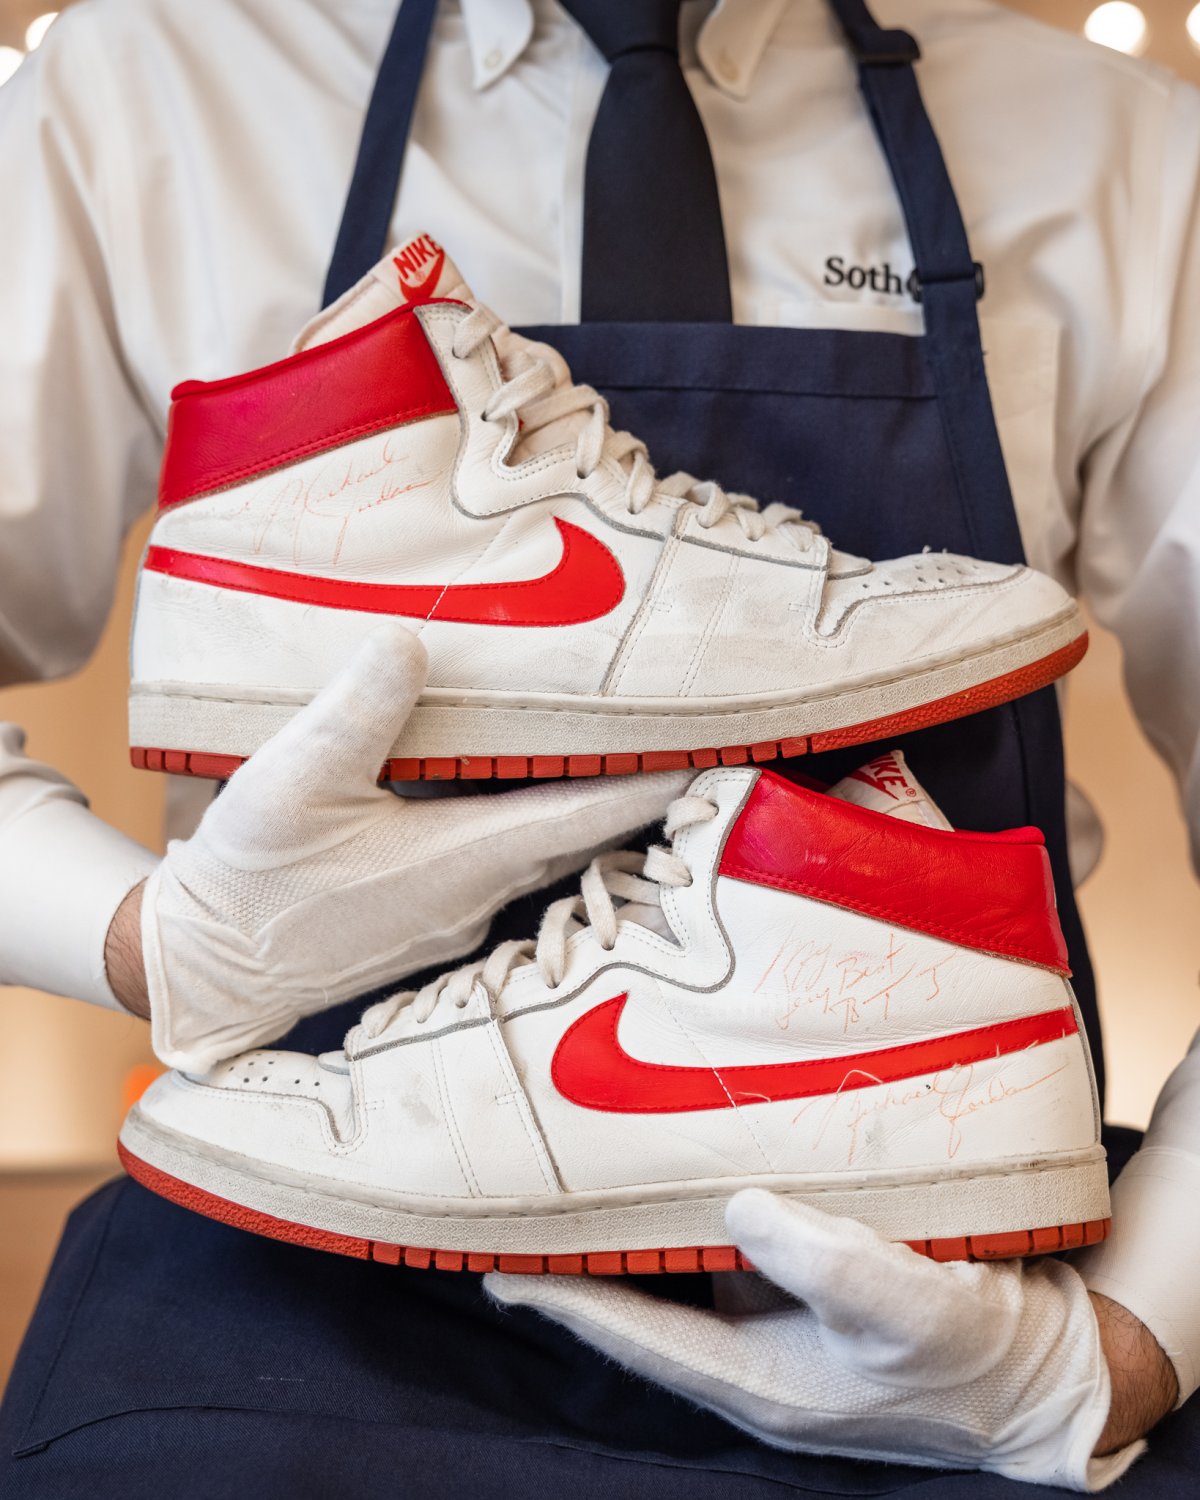 These are the 8 most expensive sneakers ever